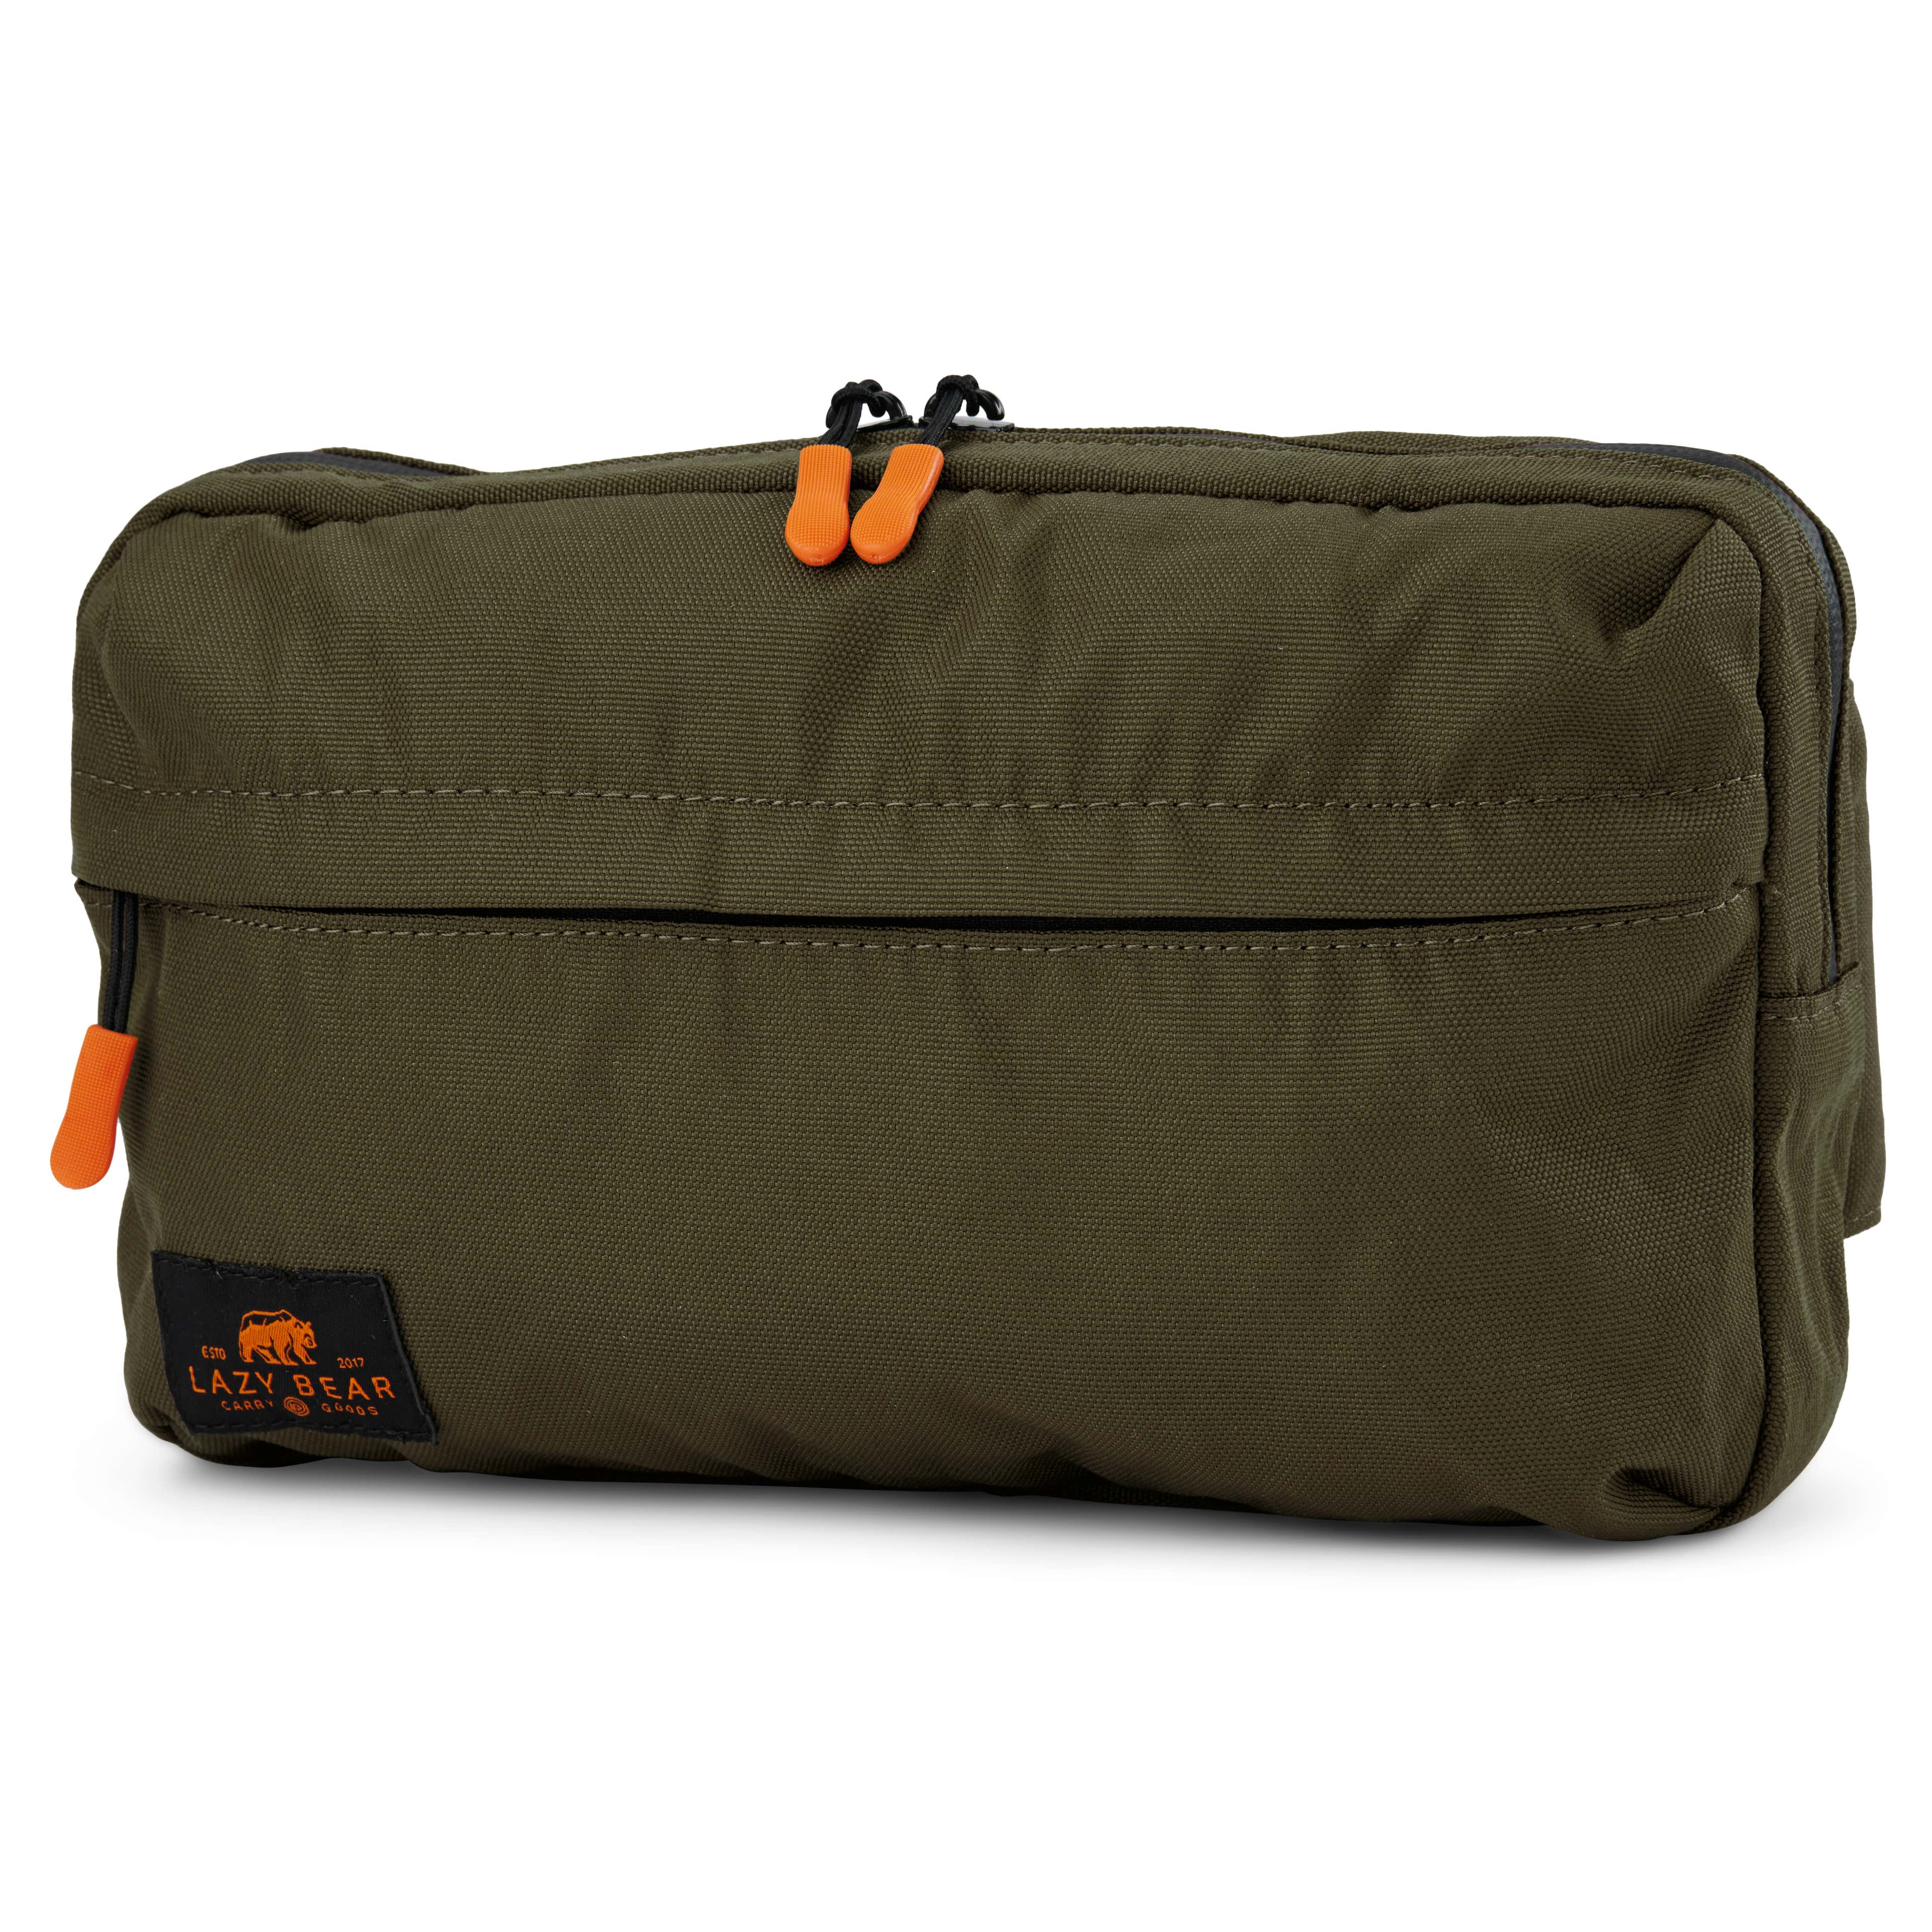 Lannie Green Foldable Fanny Pack